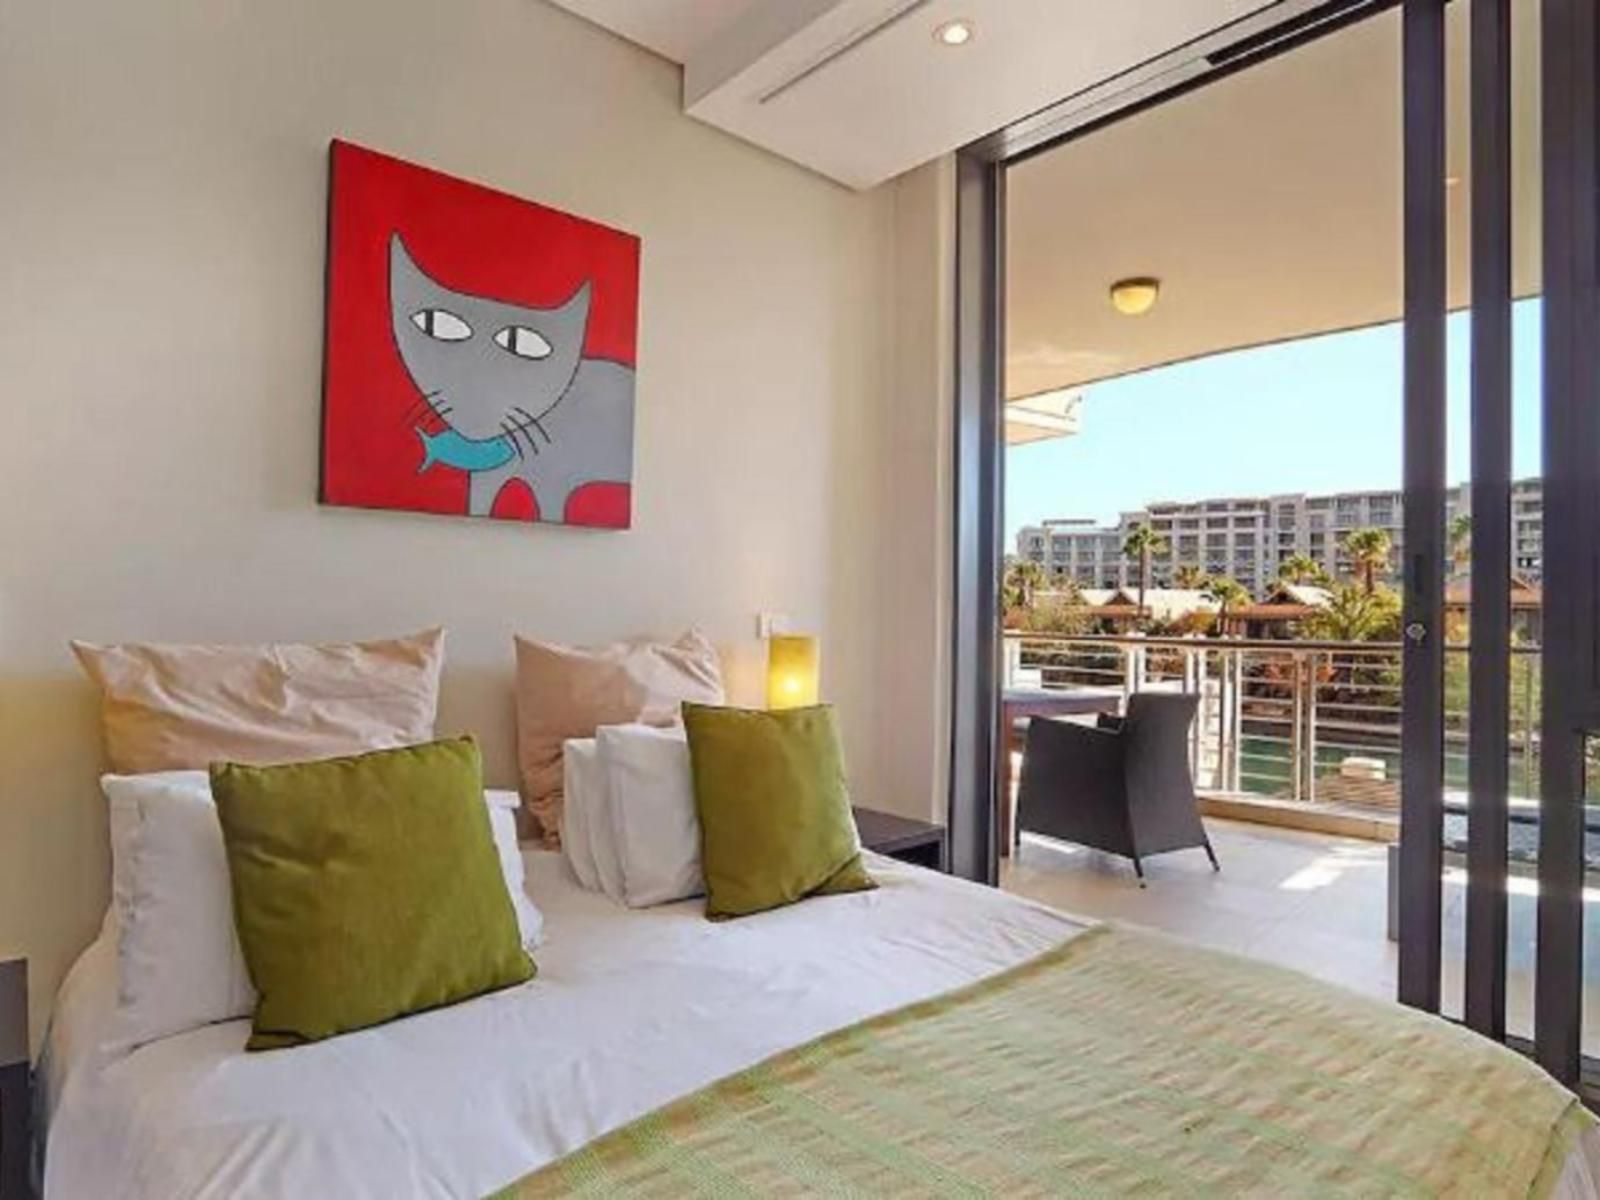 Waterfront Stays 102 V And A Waterfront Cape Town Western Cape South Africa Bedroom